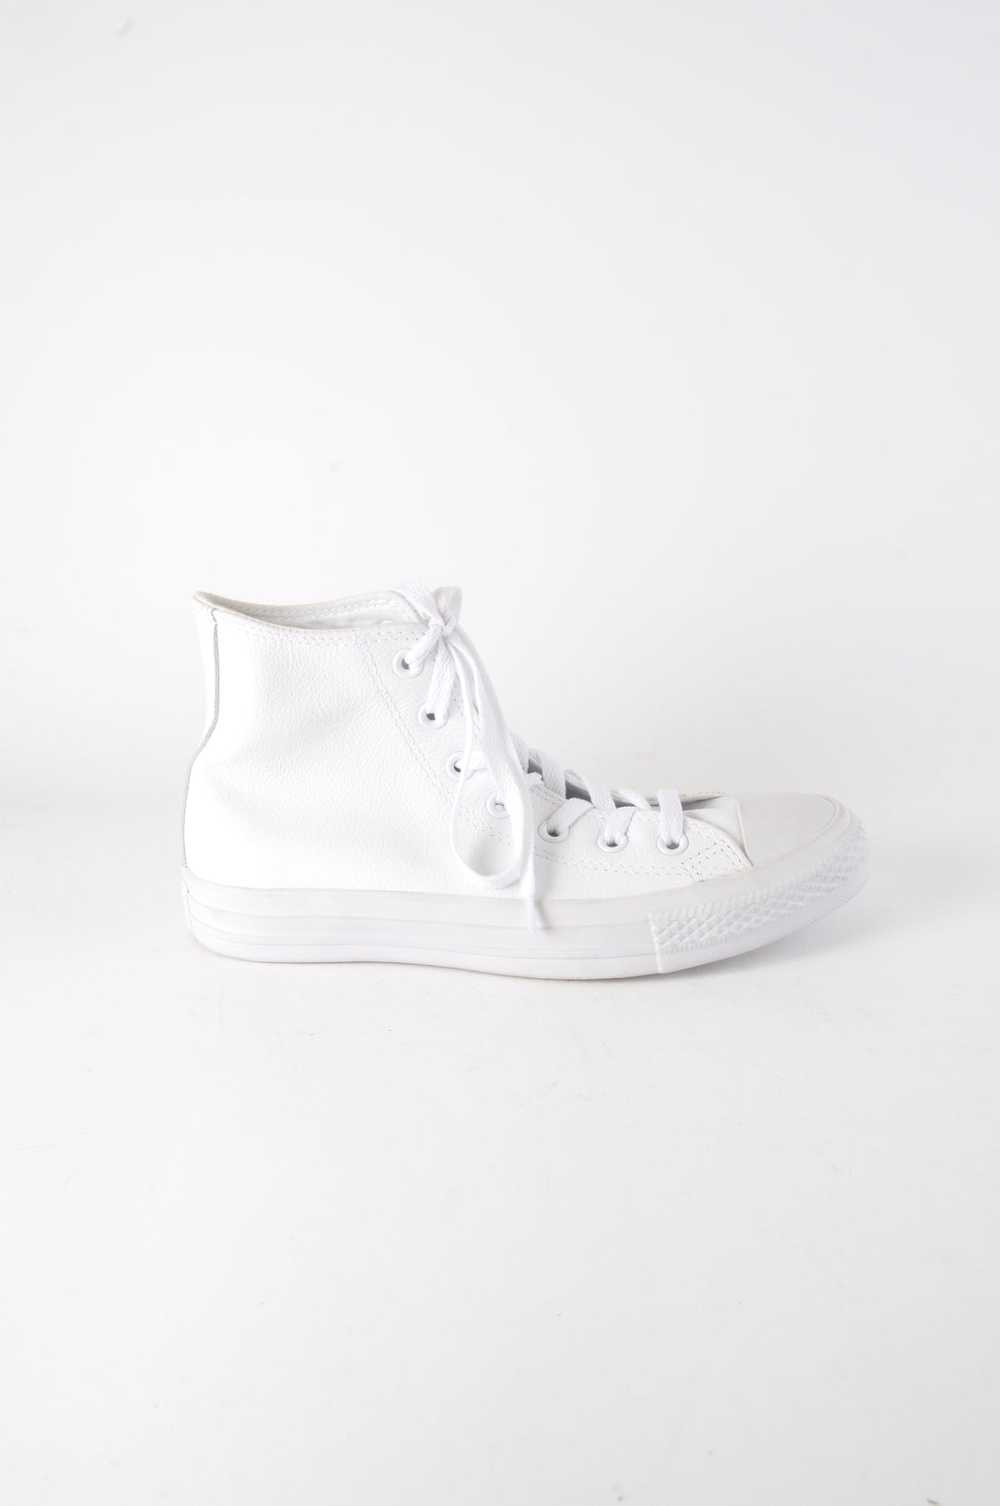 White Leather Hightop Converse - New But Imperfect - image 2